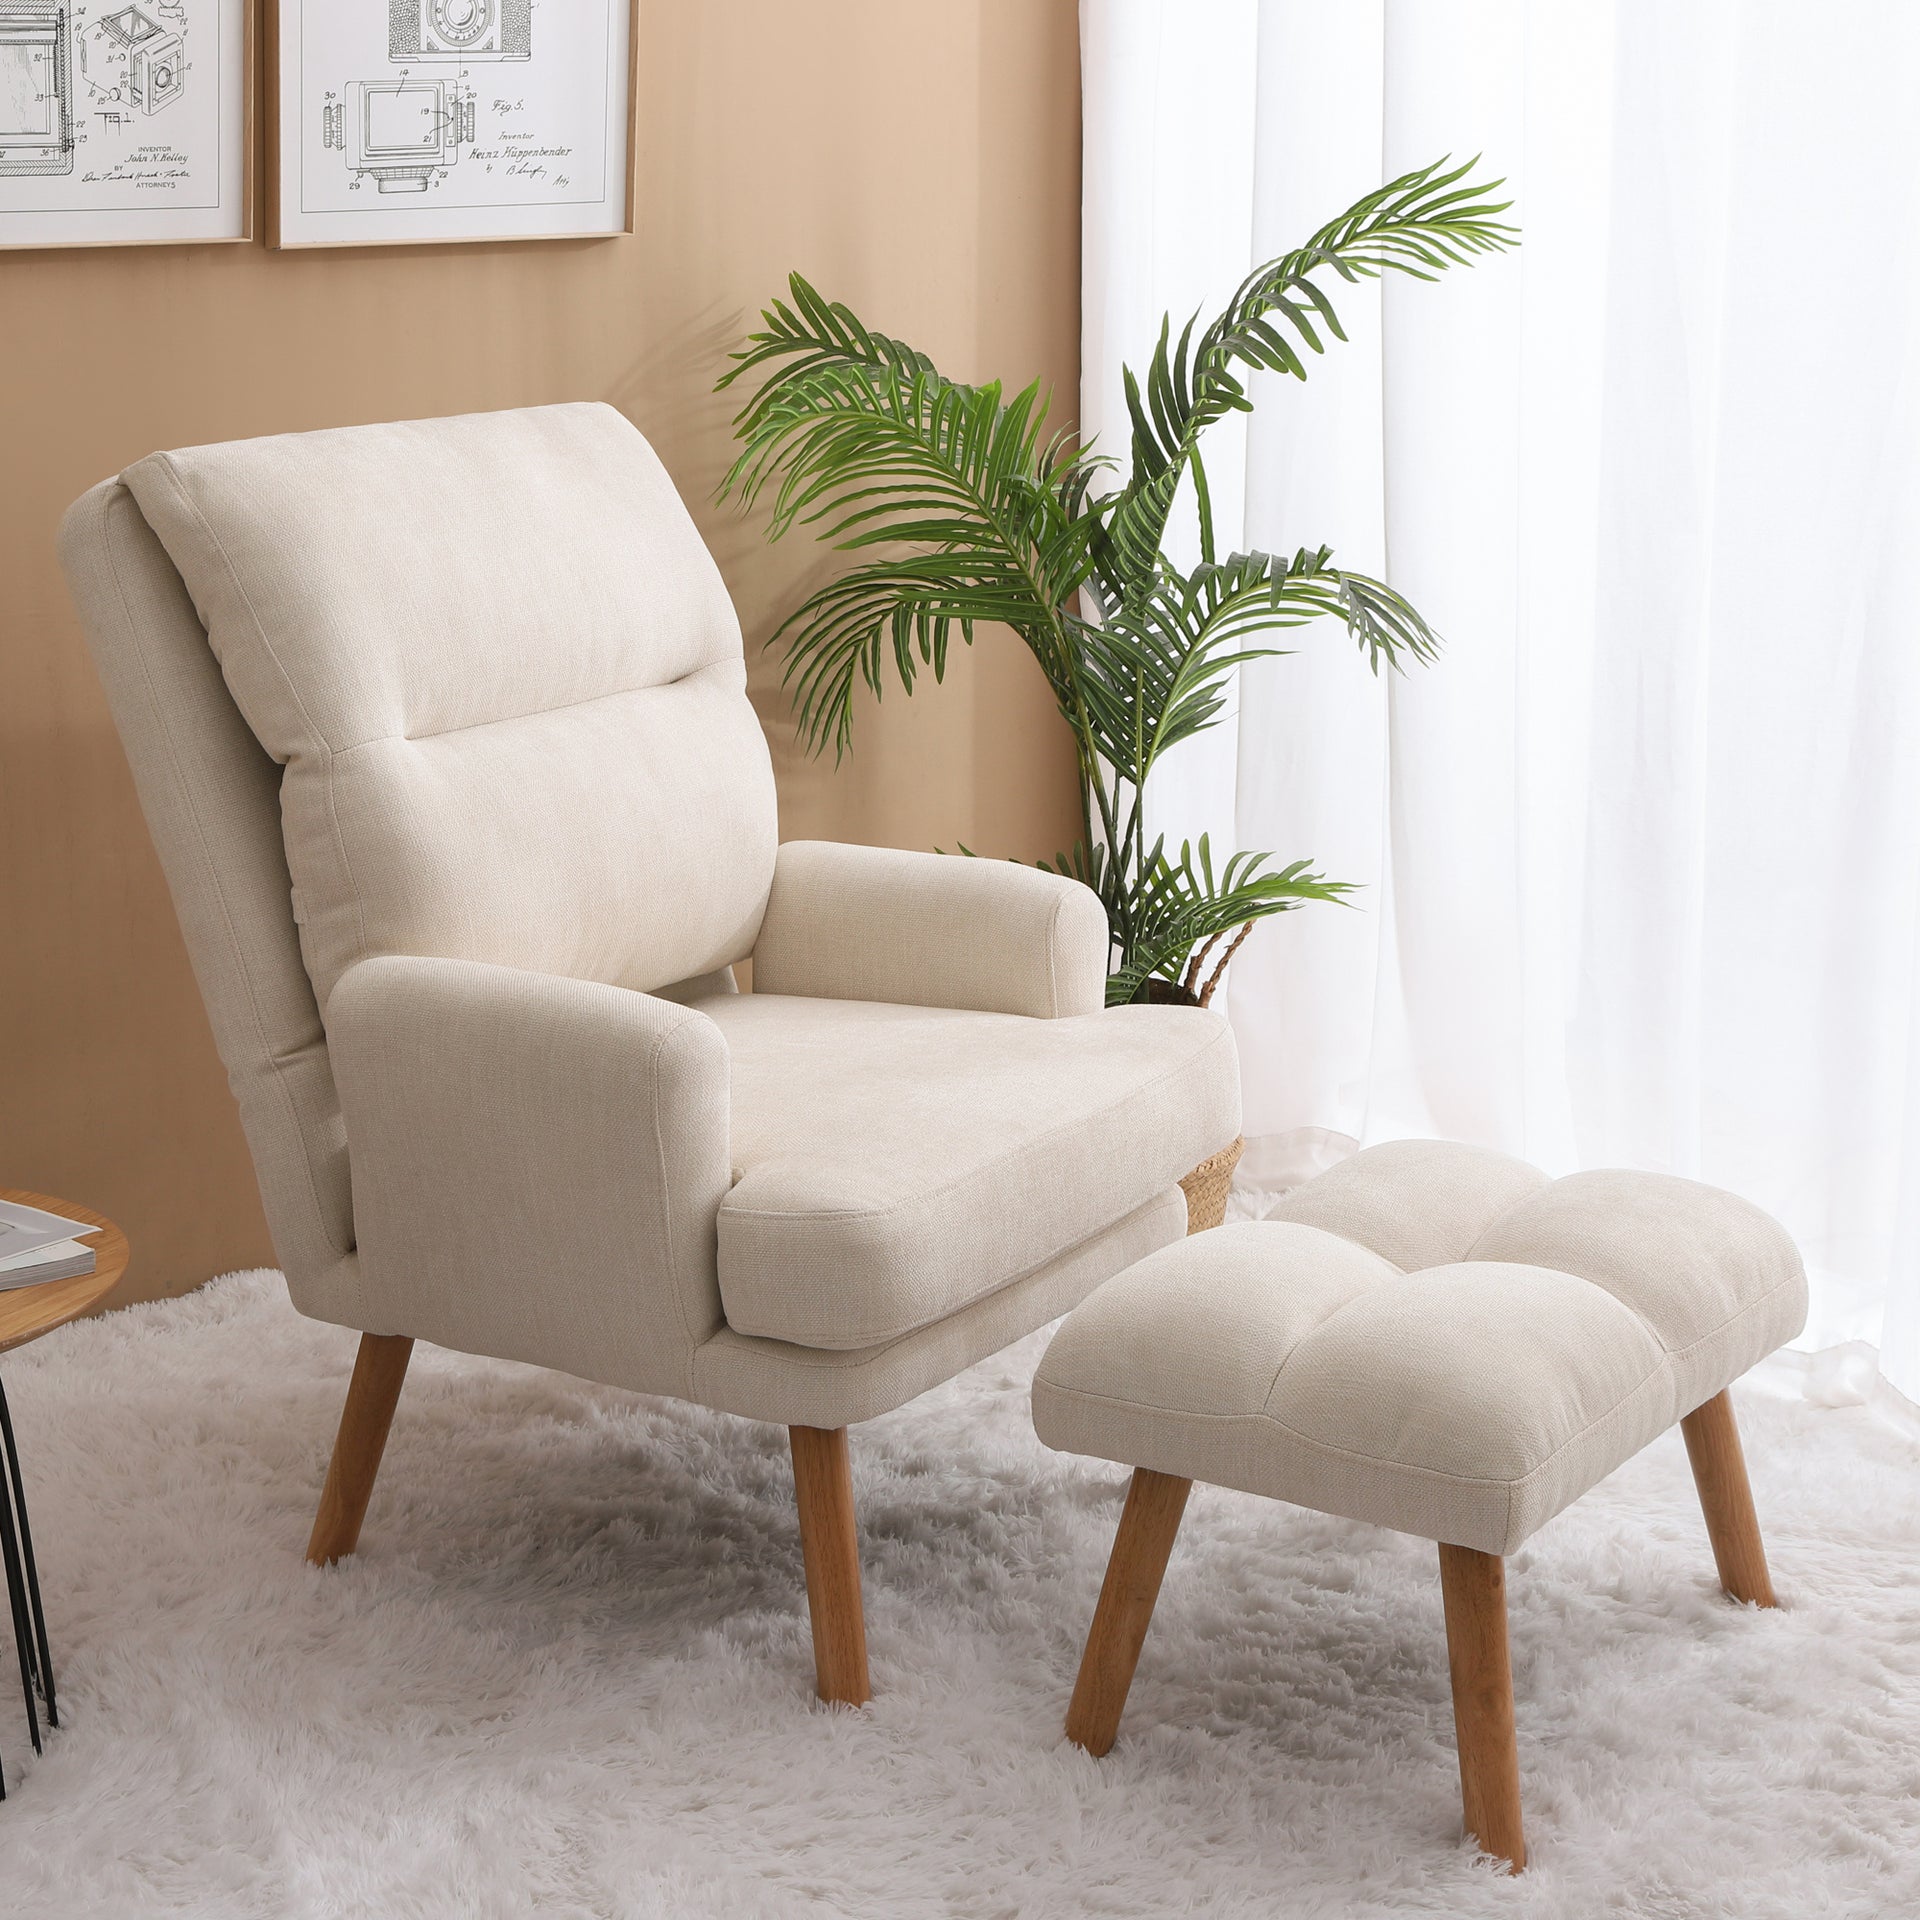 Accent Chair with Ottoman Set;  Fabric Armchair with Wood Legs and Adjustable Backrest ;  Mid Century Modern Comfy Lounge Chair for Living Room;  Bedroom;  Reading Room and Study